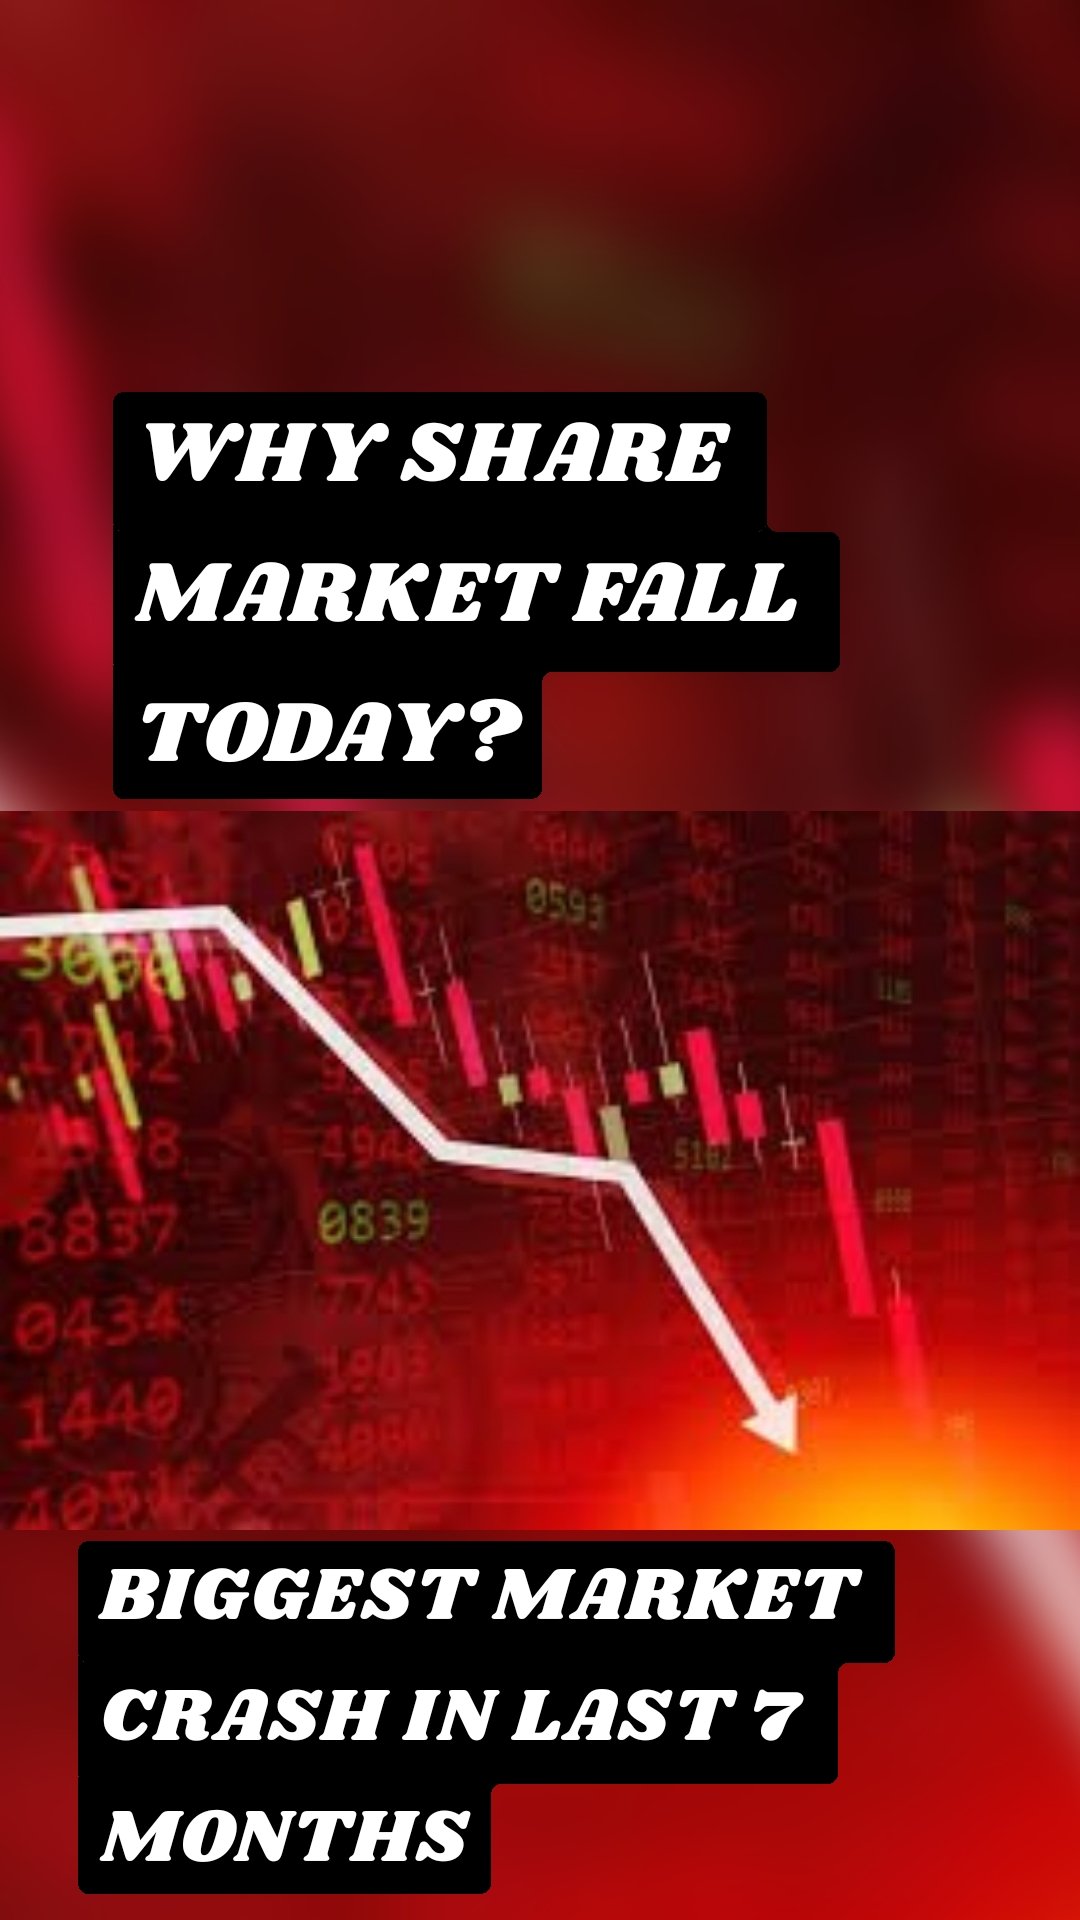 WHY SHARE MARKET FALL TODAY? BIGGEST MARKET CRASH IN LAST 7 MONTHS